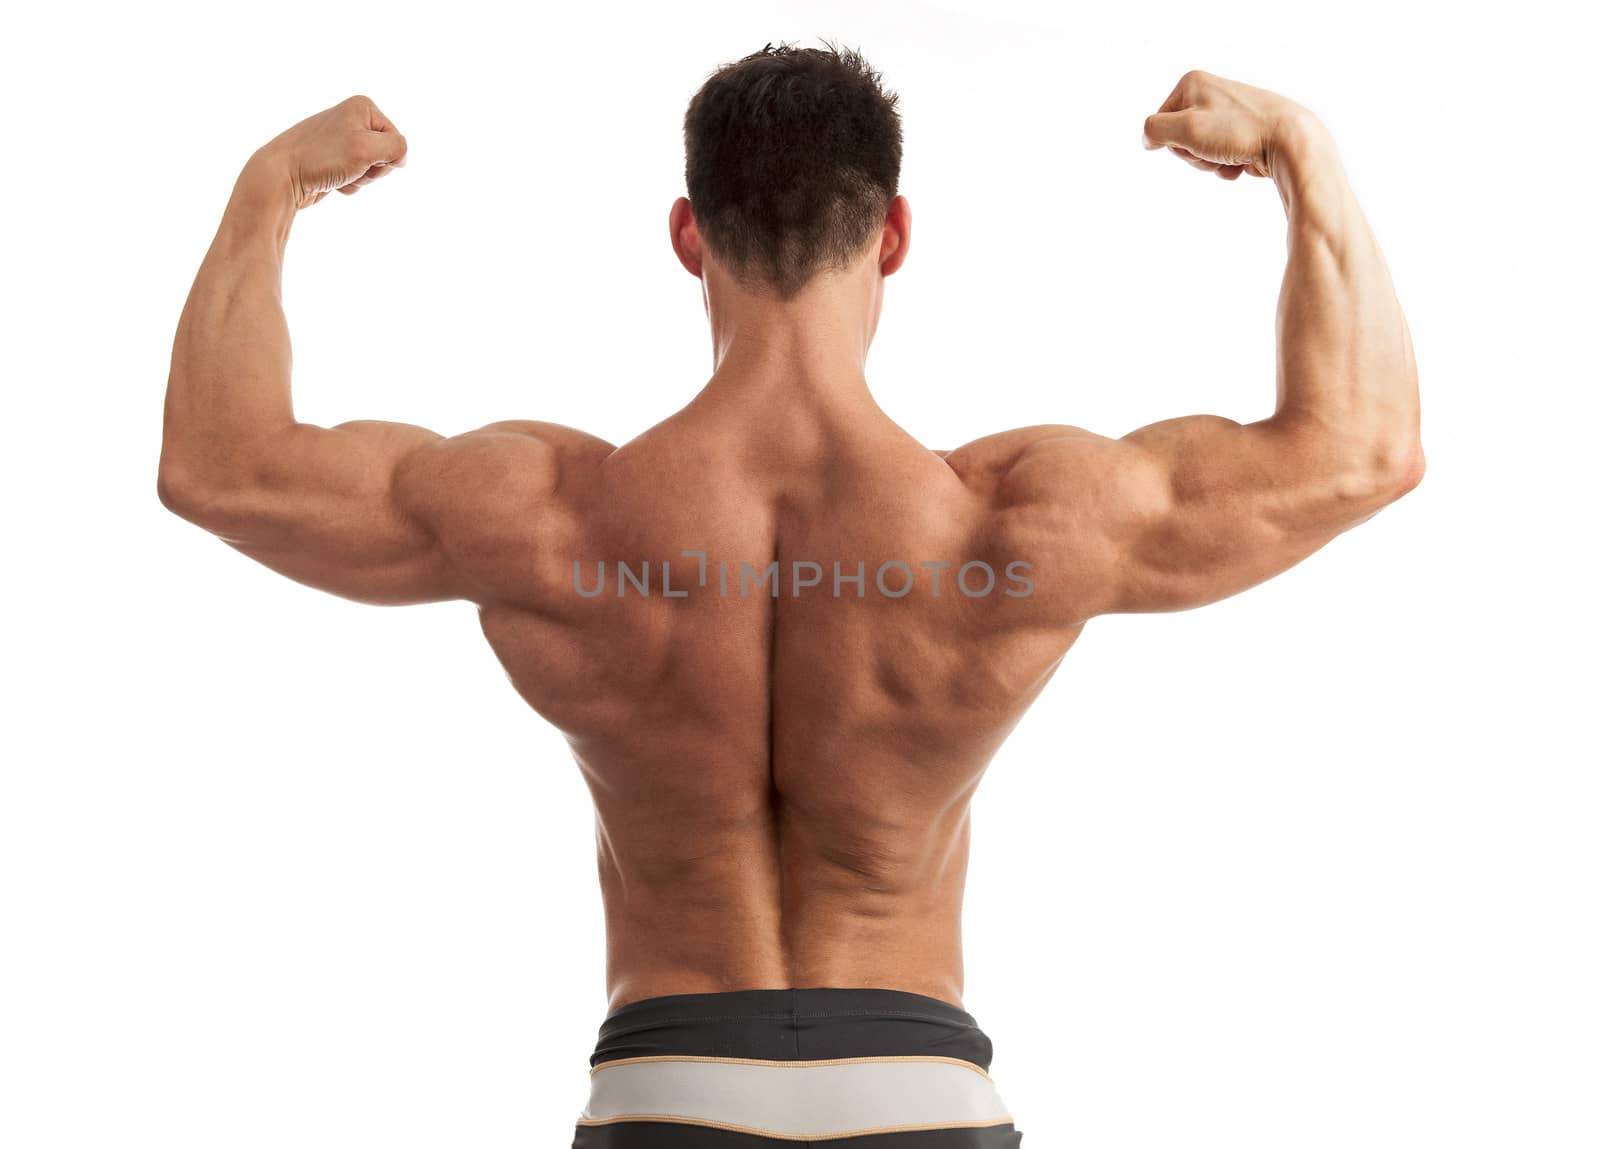 Rear view of a young man flexing his arm and back muscles over white by photobac